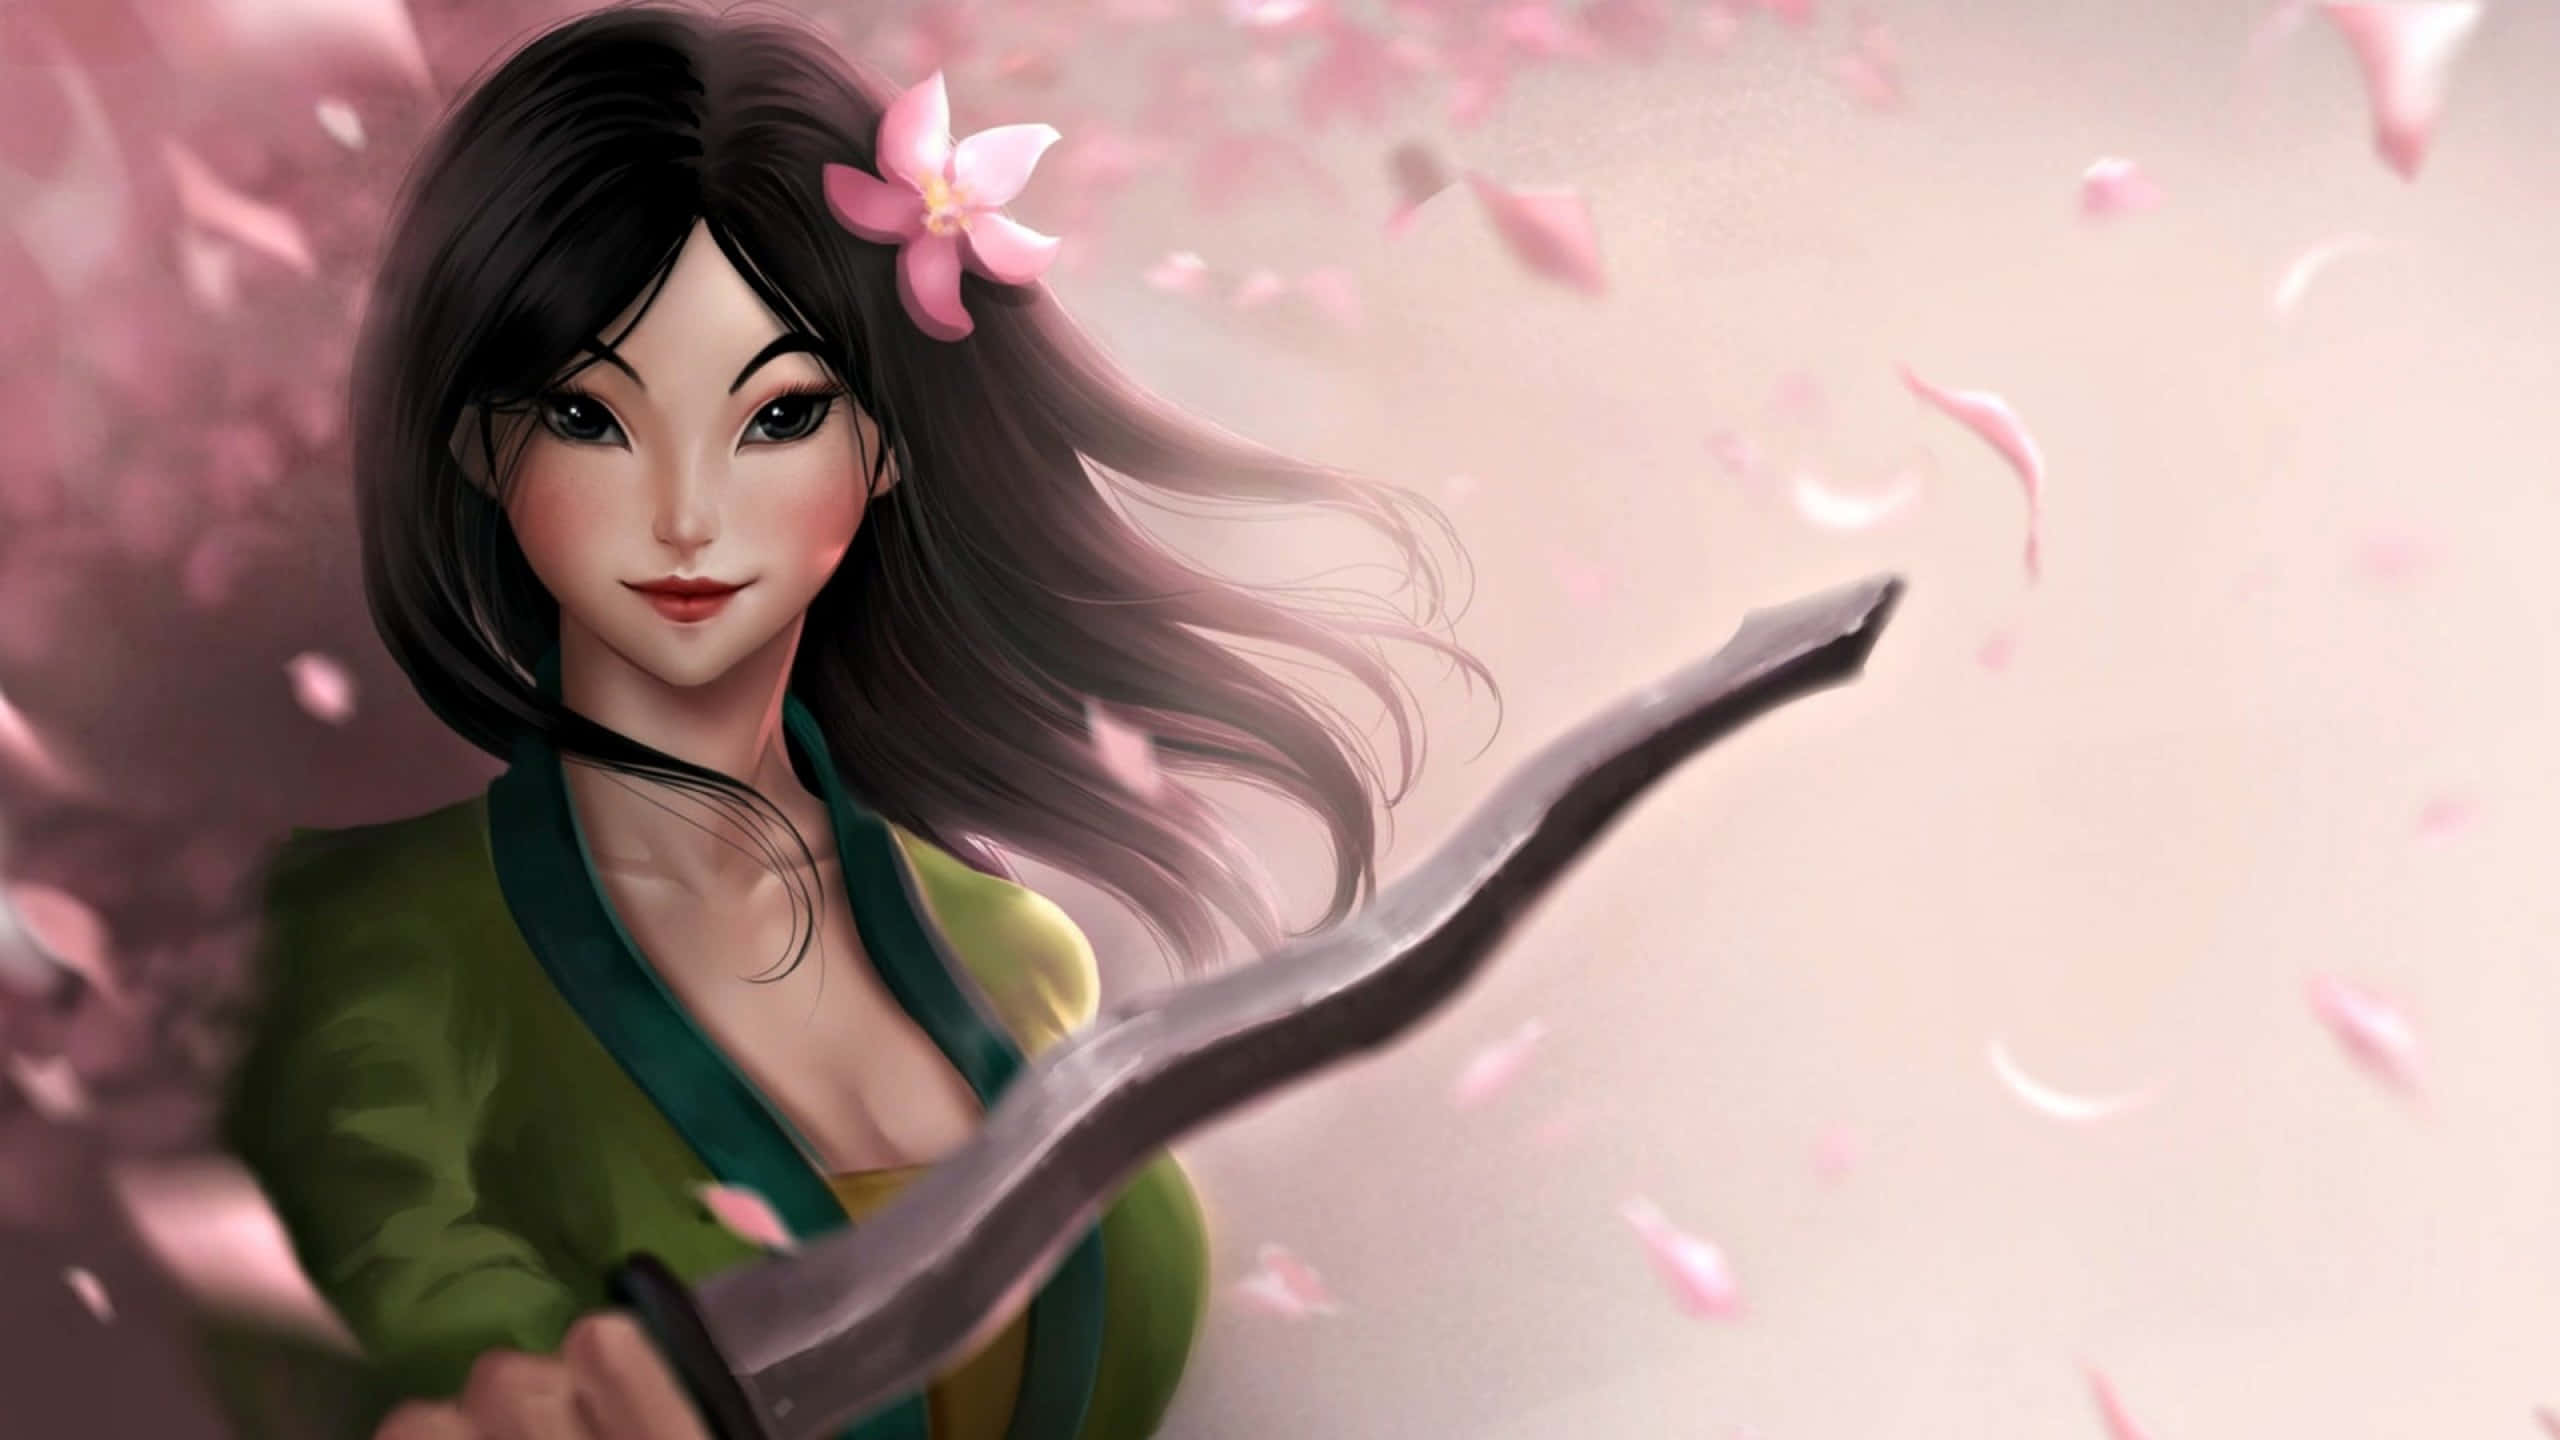 Mulan is Ready for Battle